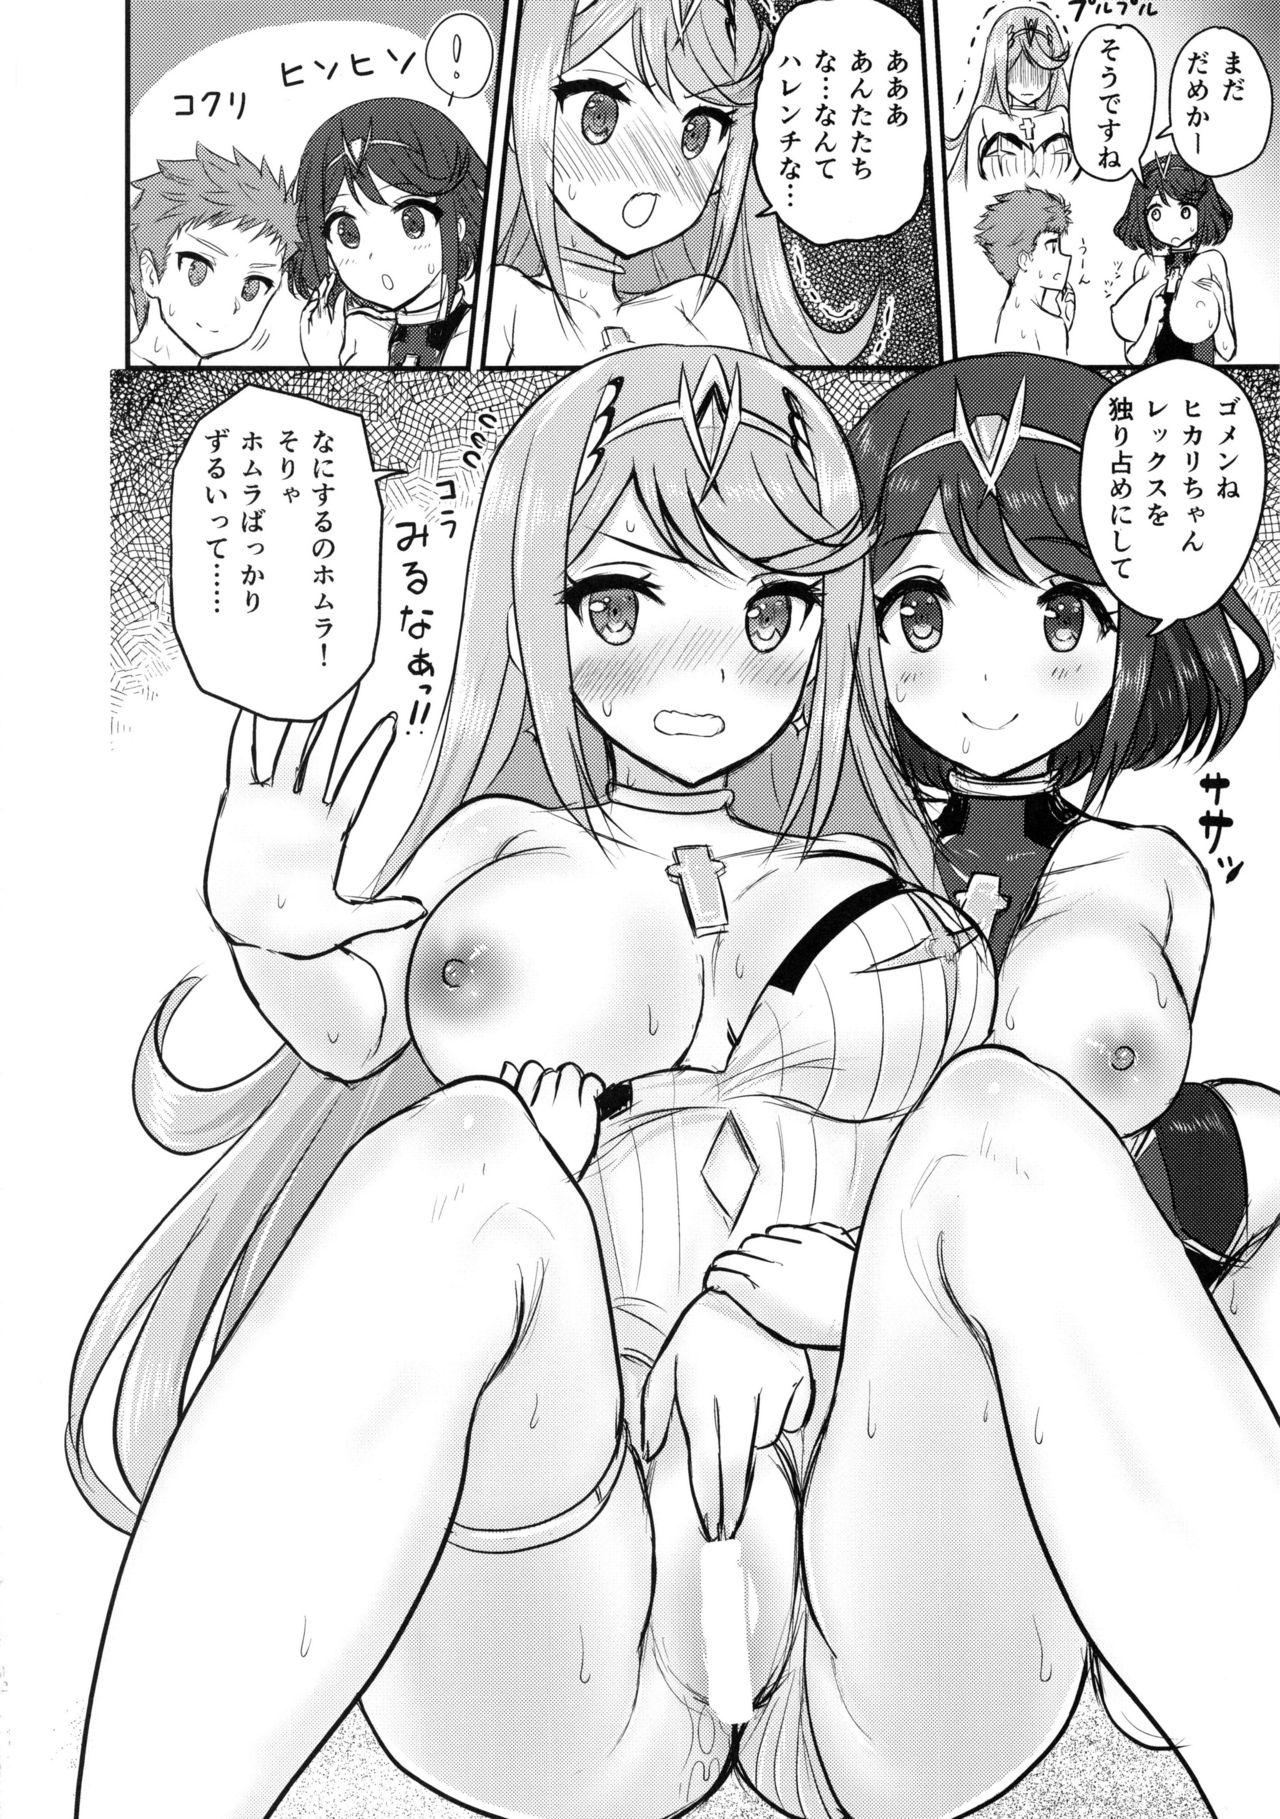 Gay Big Cock Boy Meets Girls - Xenoblade chronicles 2 Amateur Sex - Page 11